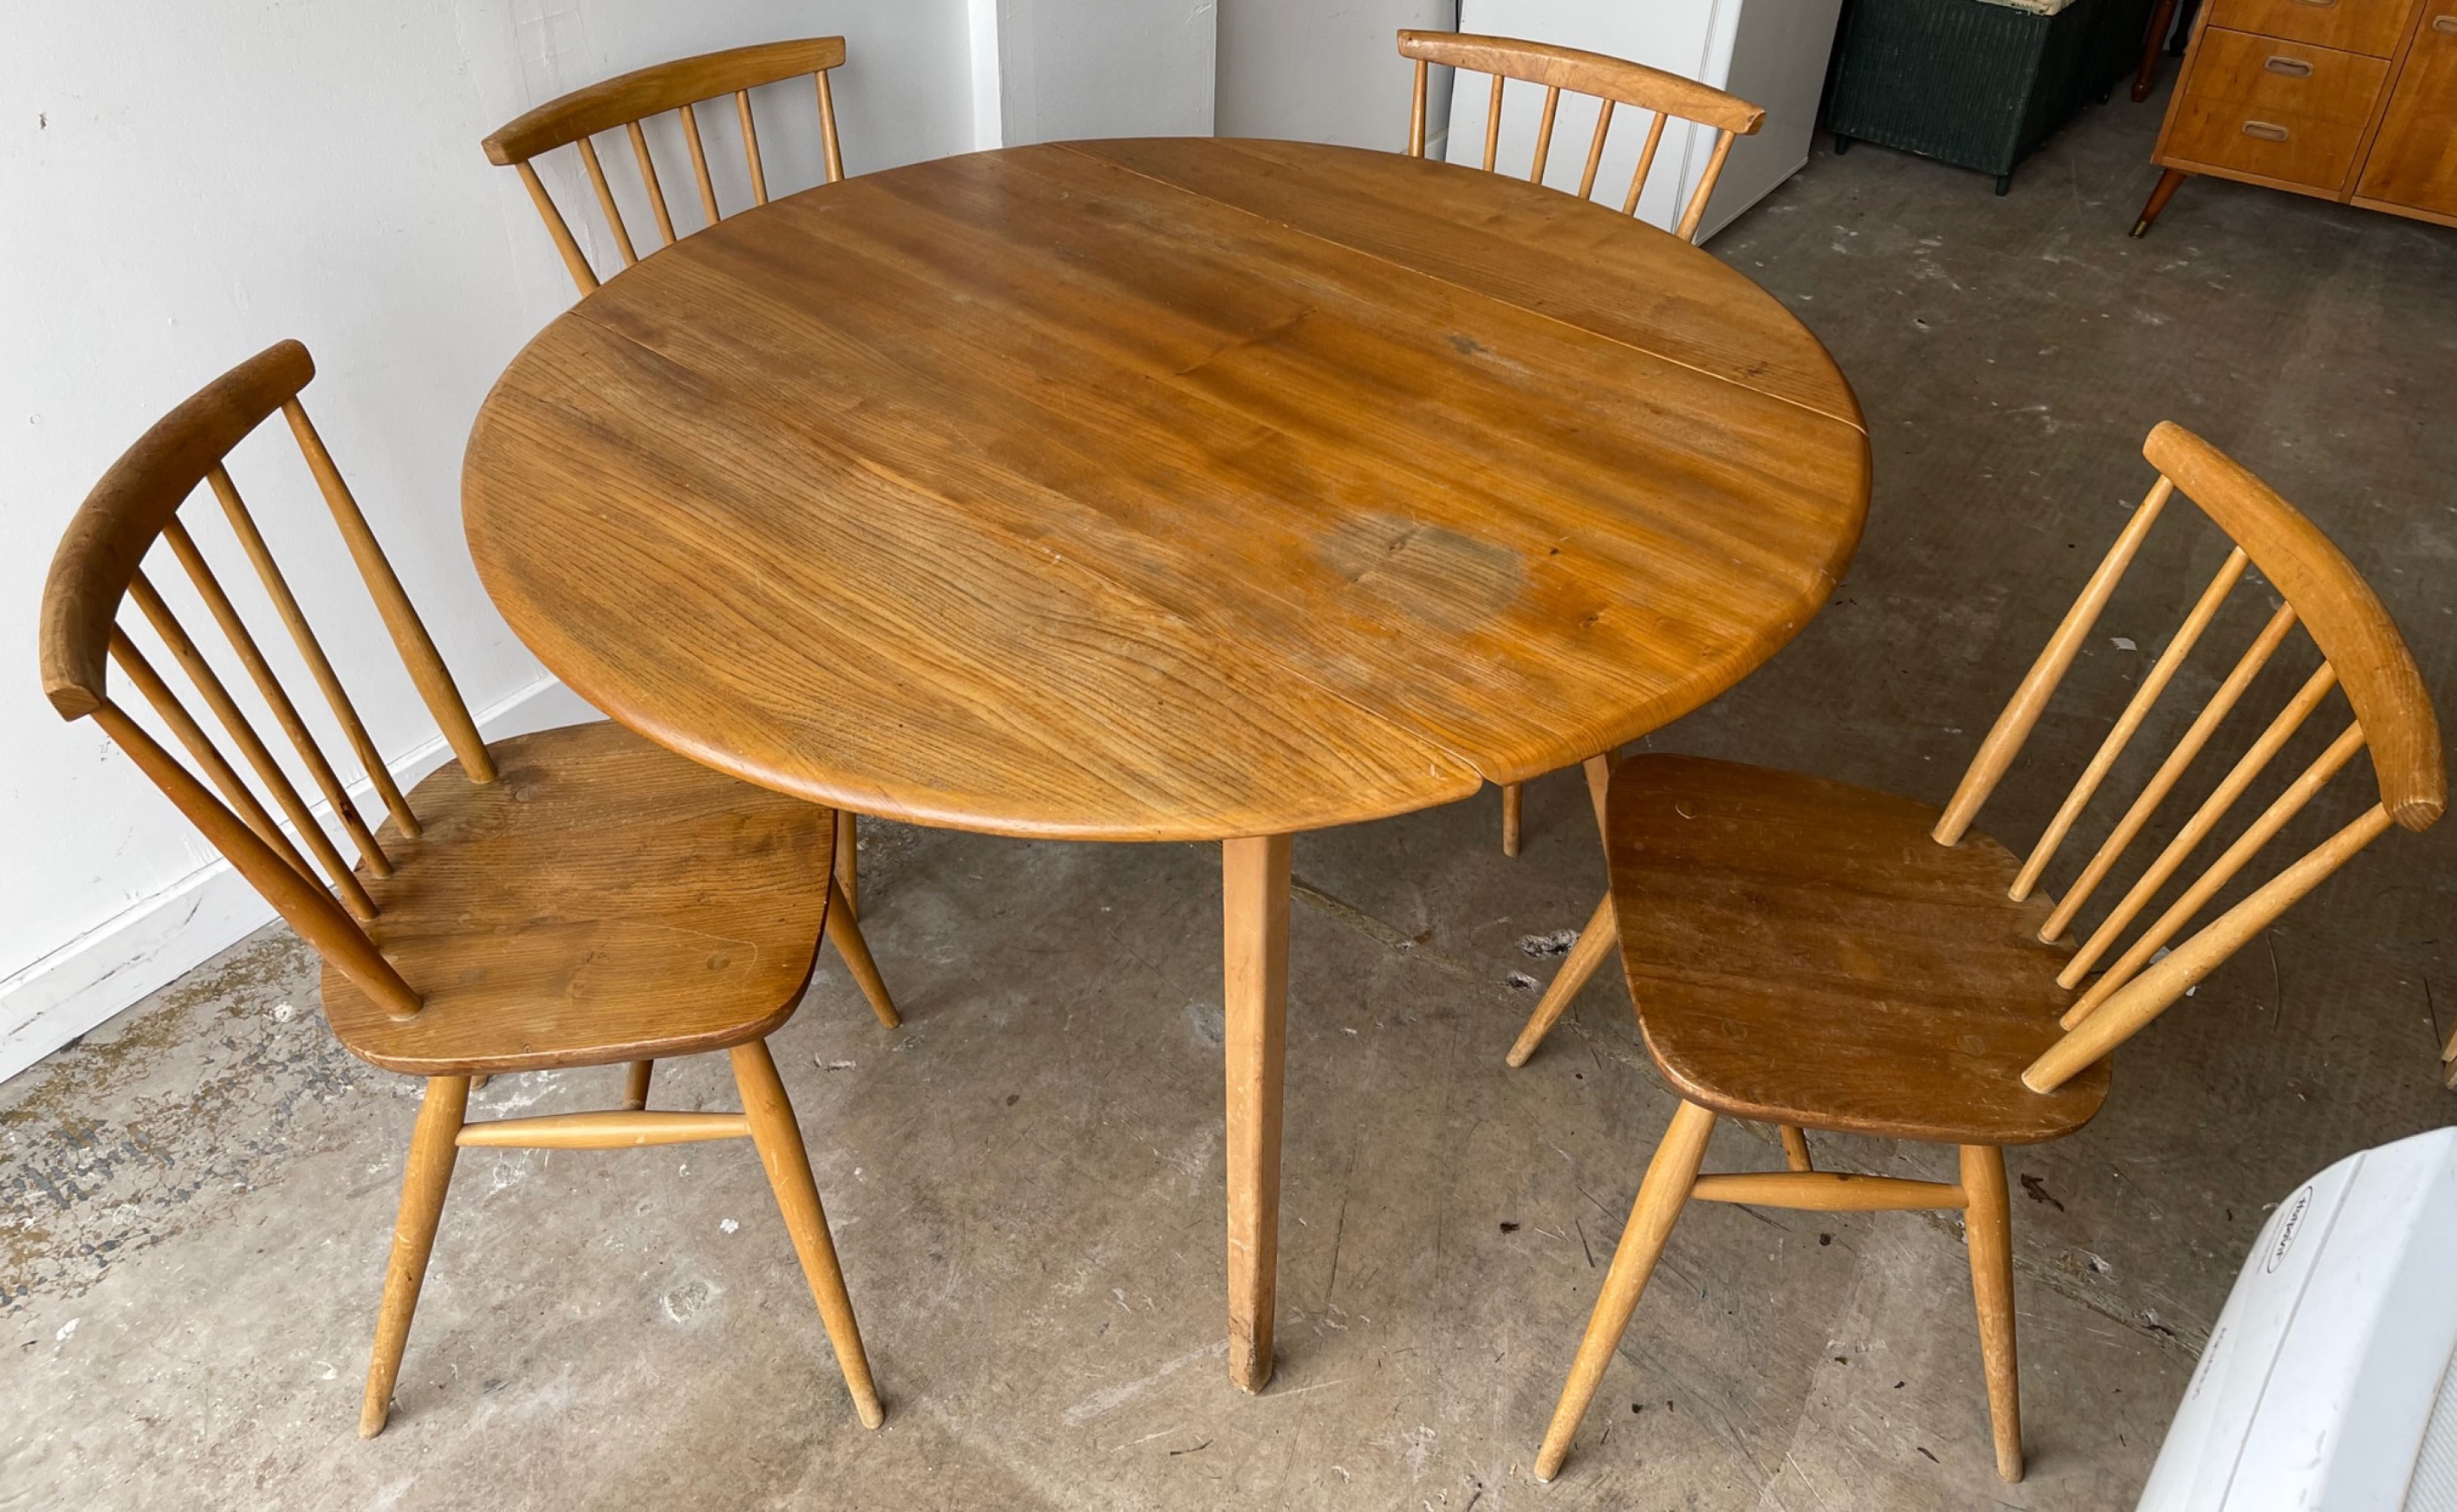 STAR ERCOL FURNITURE PIECE!A light oak round two-leaf folding dining table with 4 spindle ERCOL